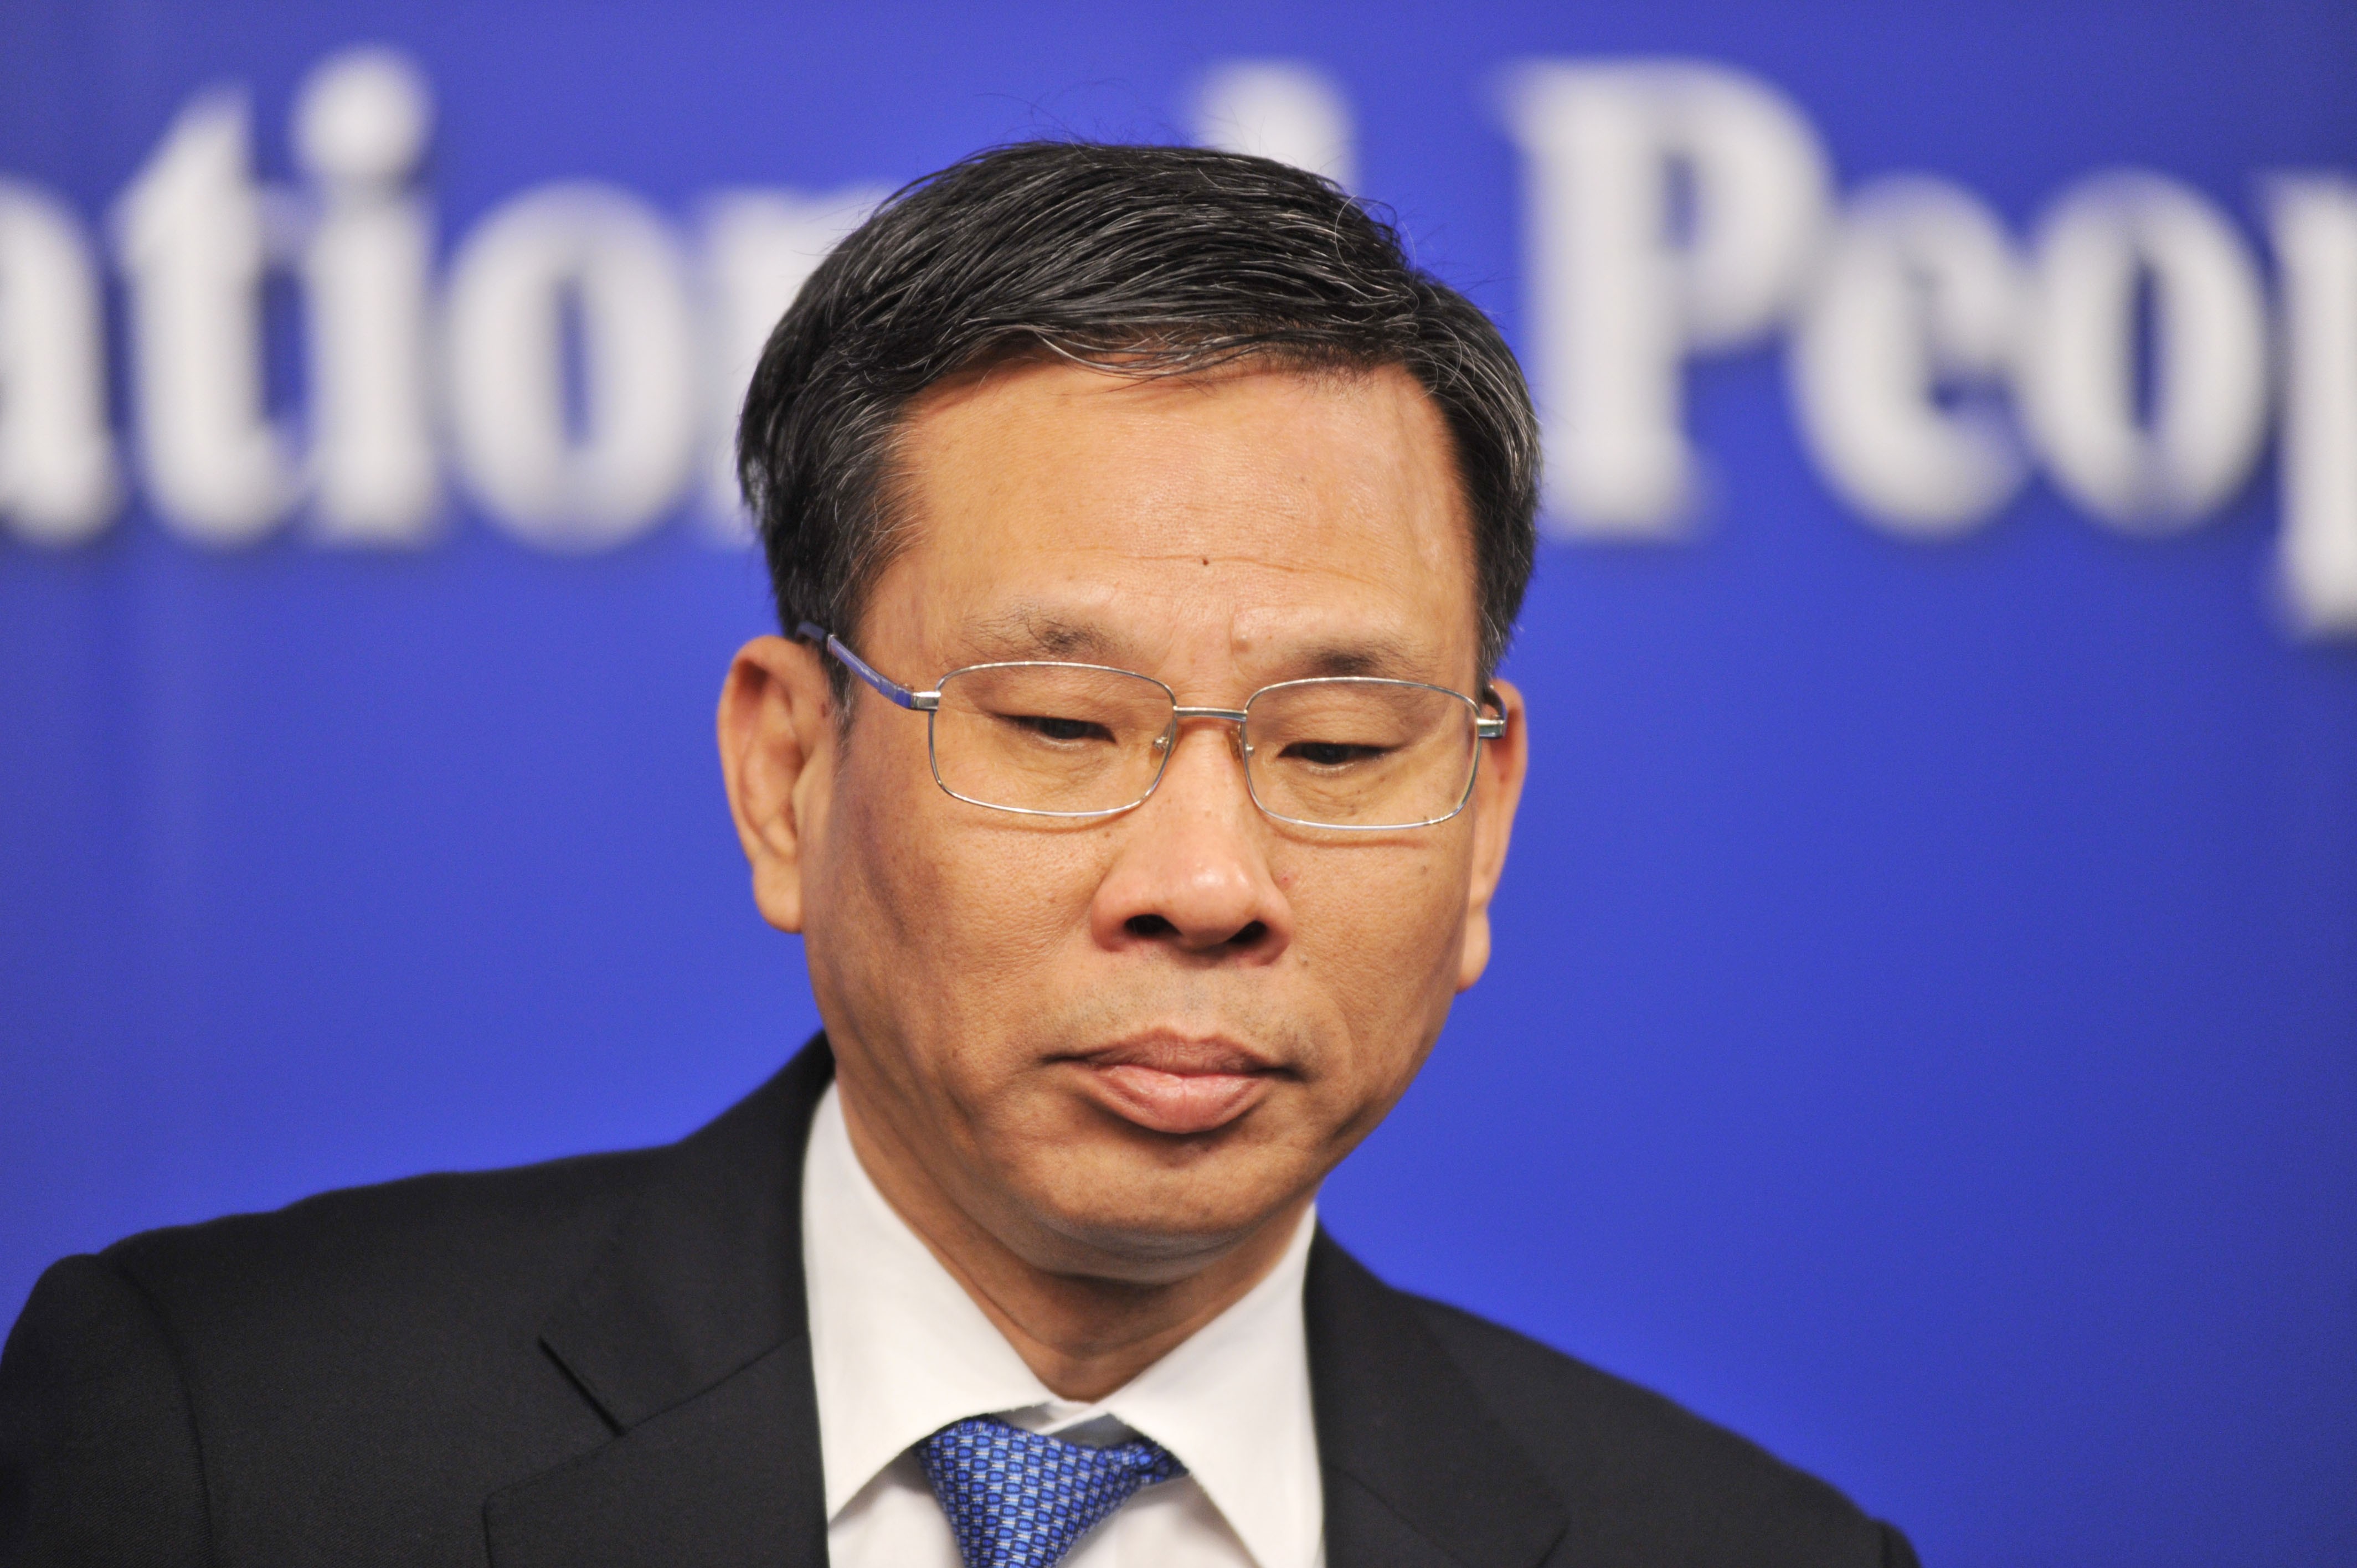 Despite not meeting the profile traditionally required for the job, Liu Kun has been named as China’s new finance minister. Photo: Handout